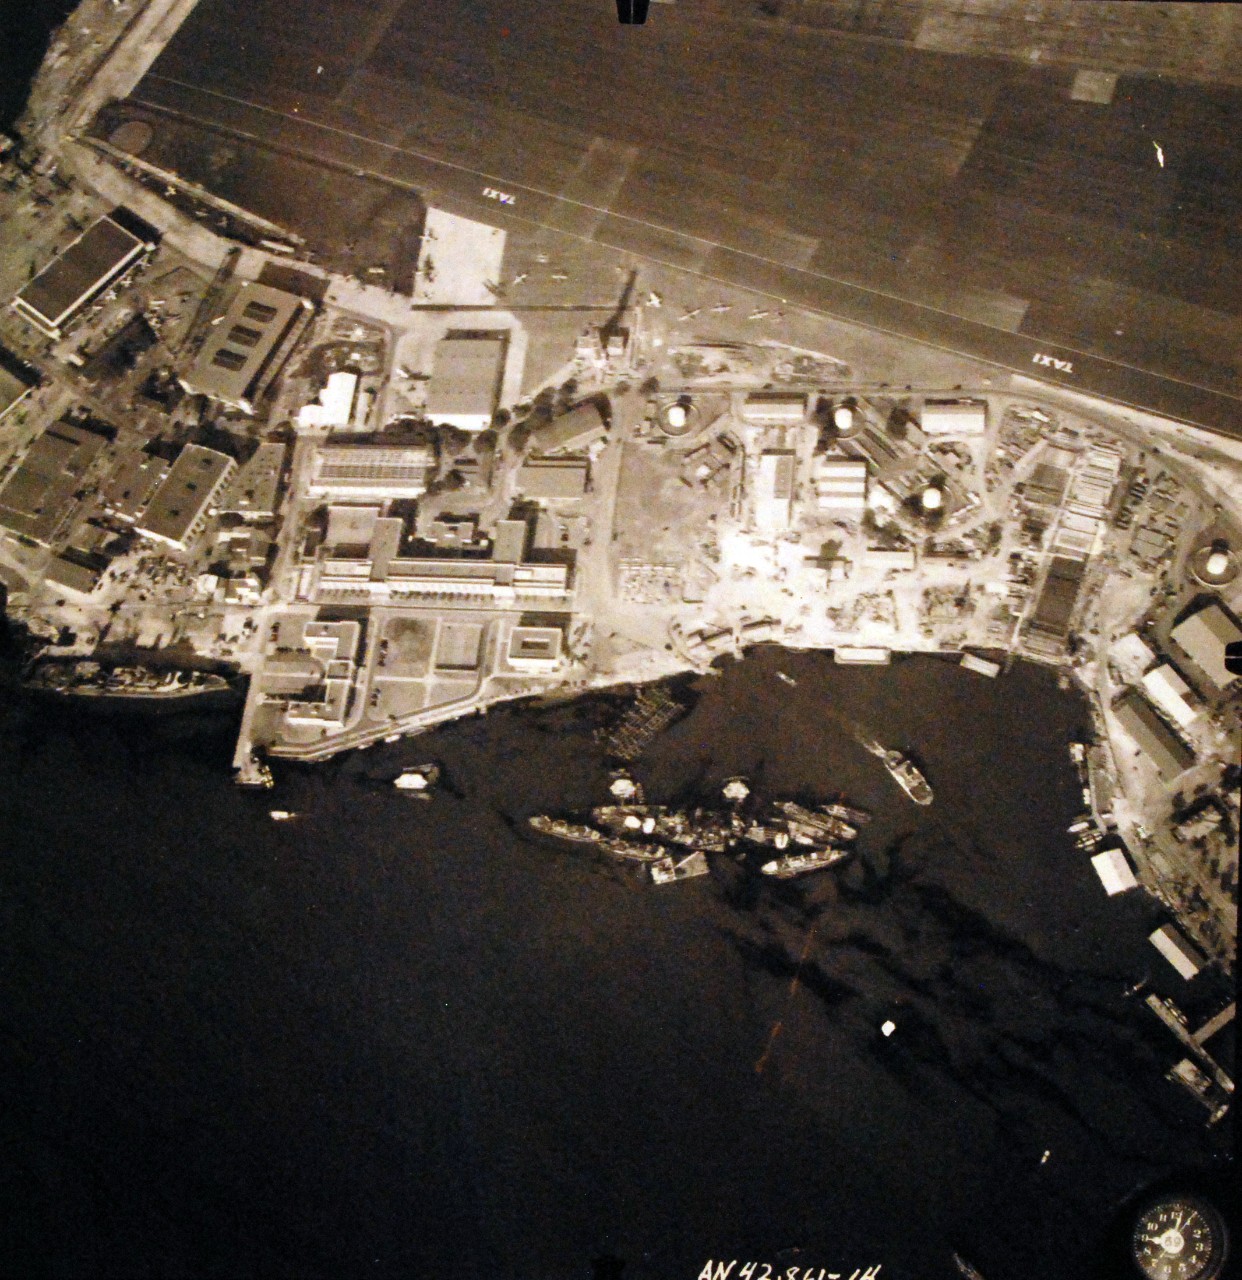 80-G-387575:  Pearl Harbor Attack, 7 December 1941.  Aerial view of "Battleship Row" moorings on the southern side of Ford Island, 10 December 1941, showing damage from the Japanese raid three days earlier.  USS California (BB 44) is shown.  Note dark oil streaks on the harbor surface, originating from the sunken battleships. Photographed by VJ-1 at an altitude of 3,000 feet and released November 9, 1950.  U.S. Navy photograph, now in the collections of the National Archives.      (9/22/2015).